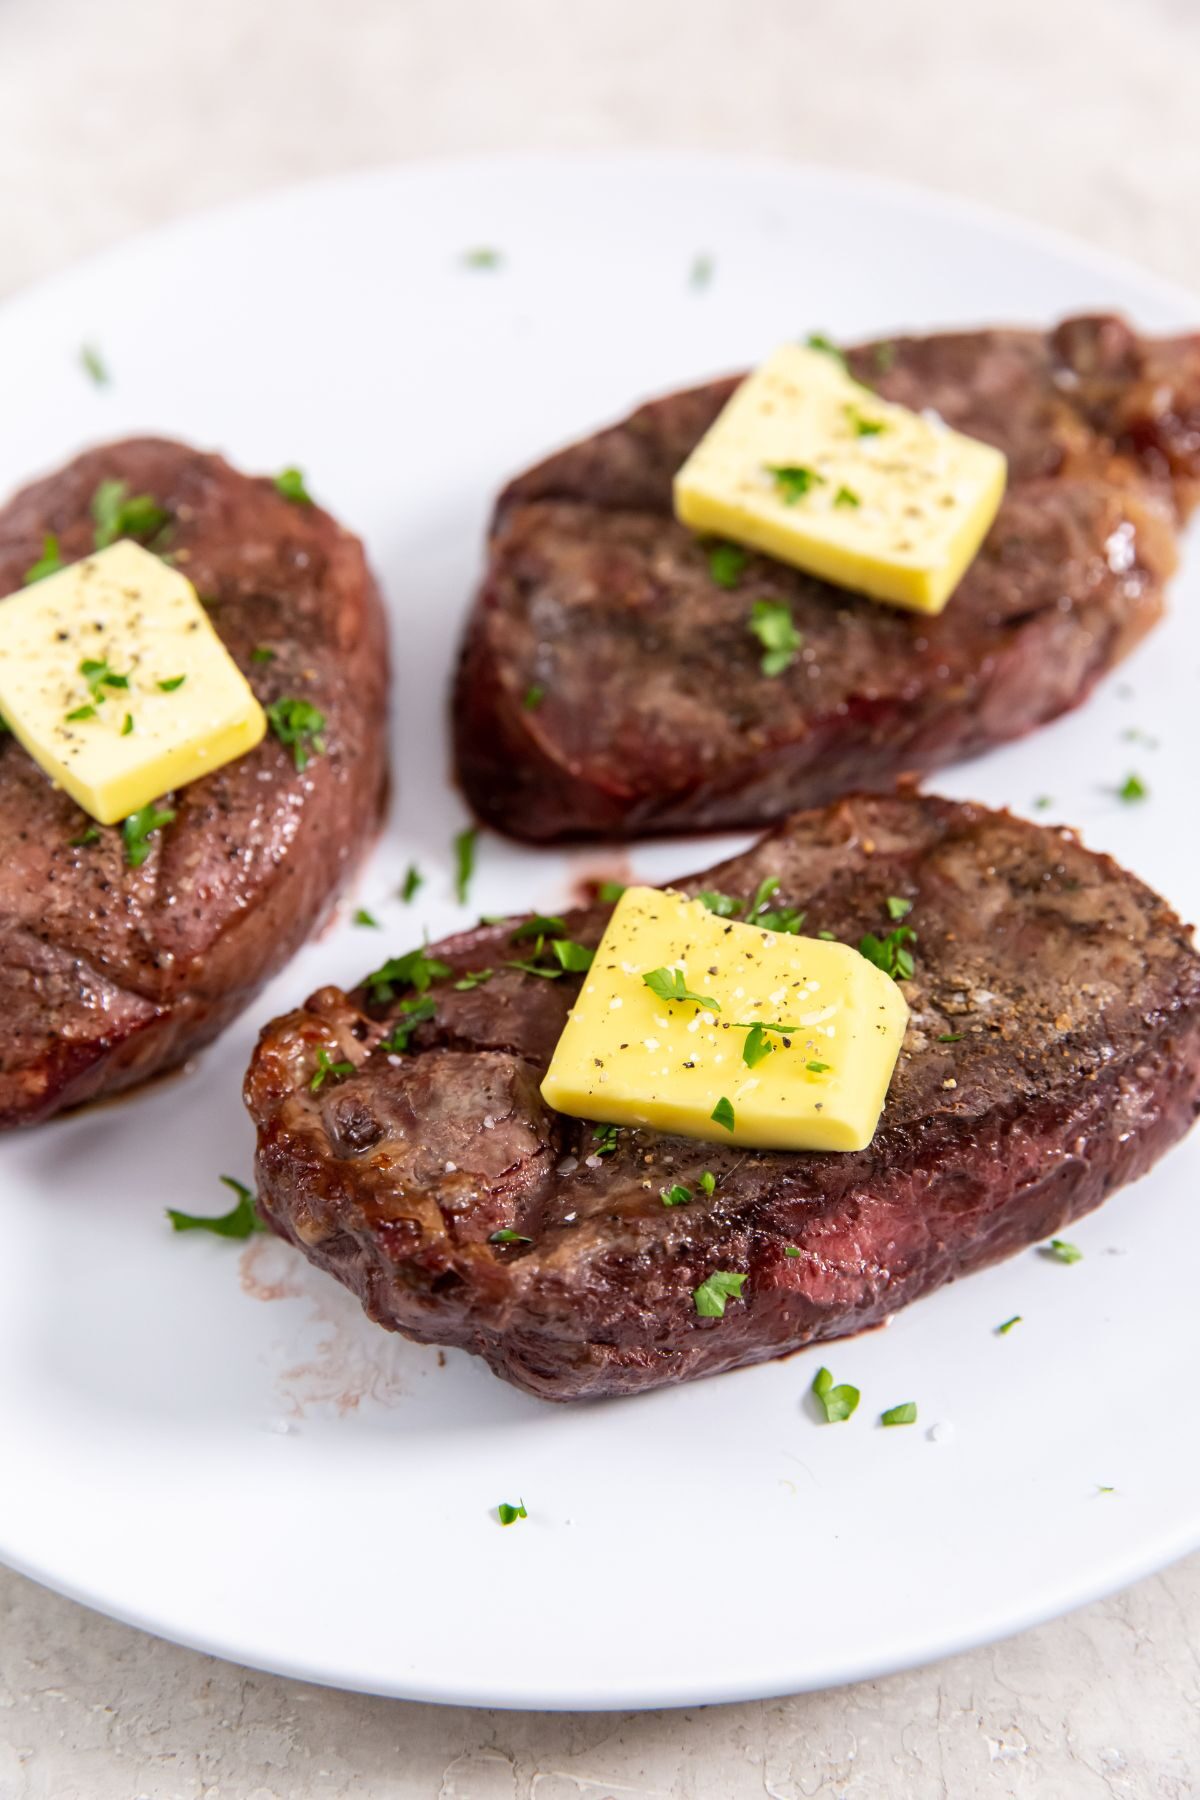 Three cooked petite sirloin steaks on a white plate and topped with butter and herbs.